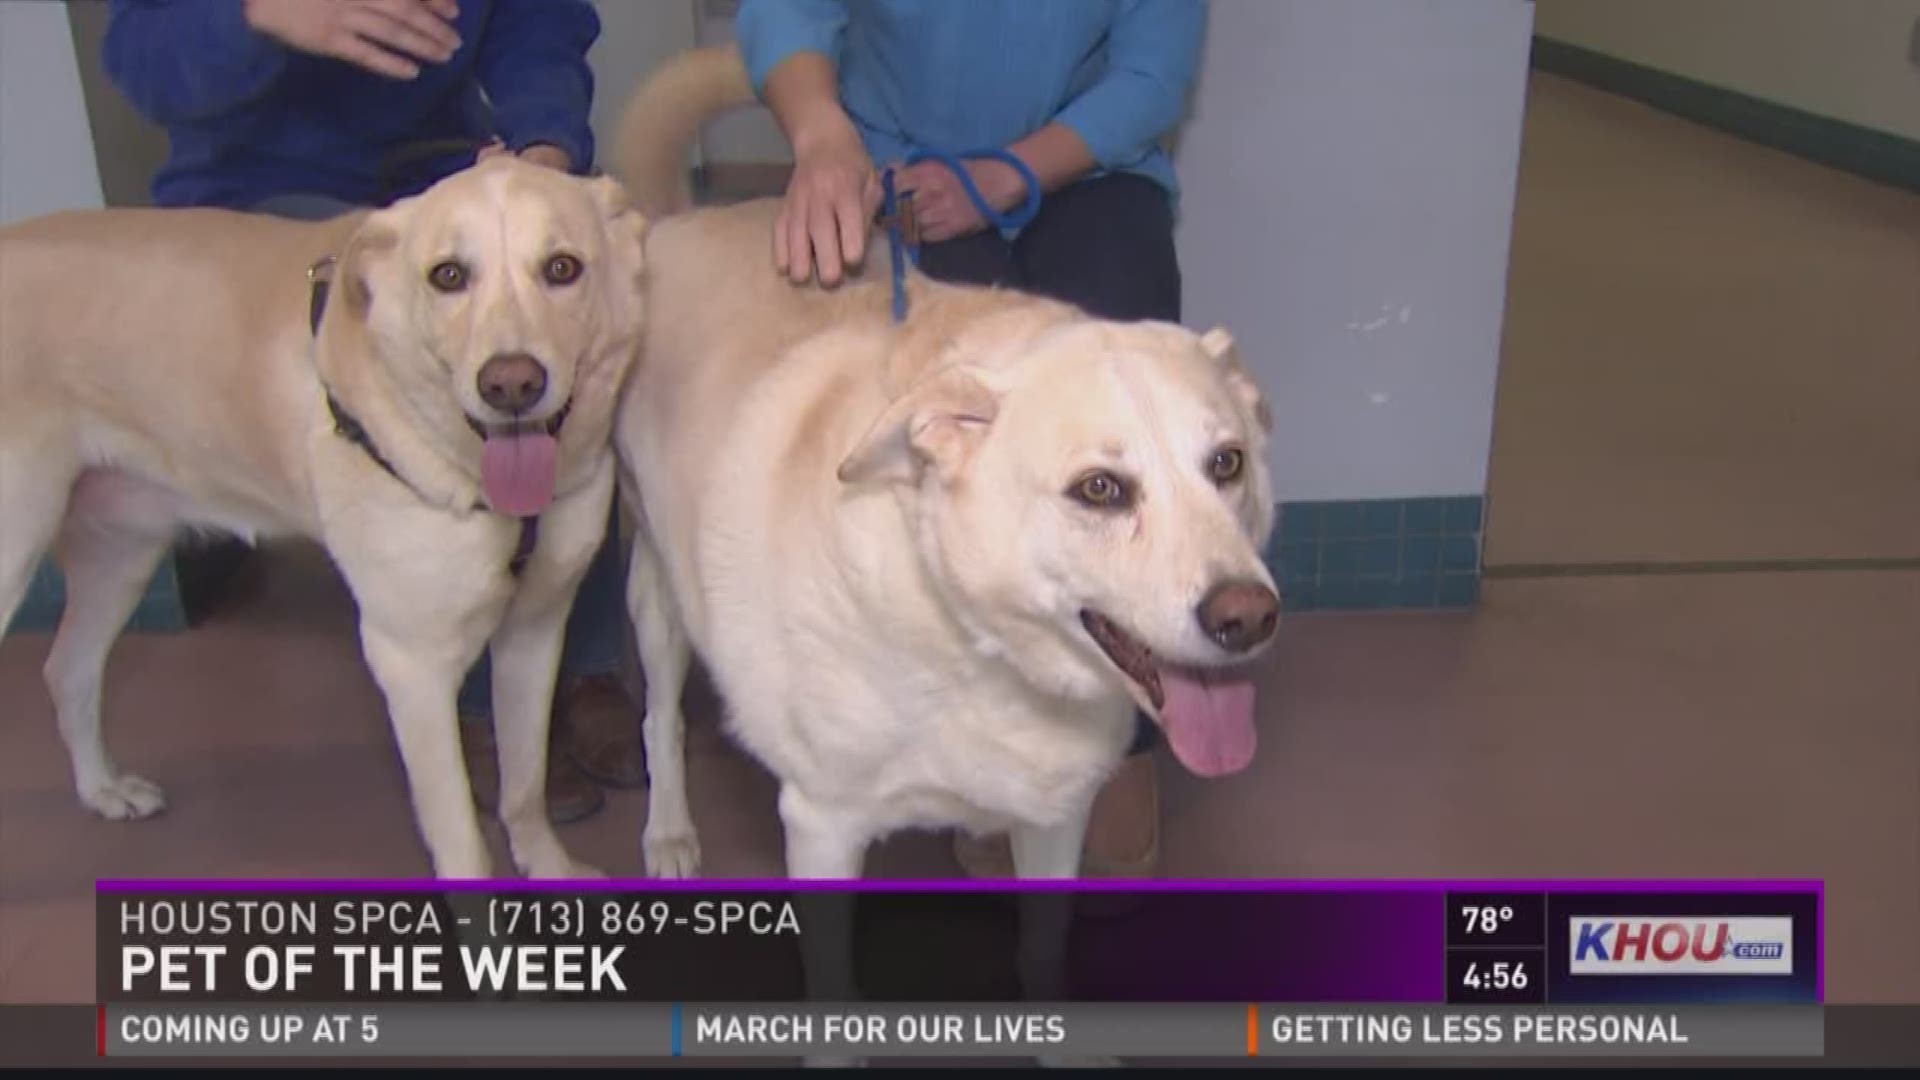 Our Pets of the Week are a couple of 10-year-old sisters named Lily and Daisy. They have been together all their lives and must be adopted together. They love other pets and children. For more information. check HoustonSPCA.org